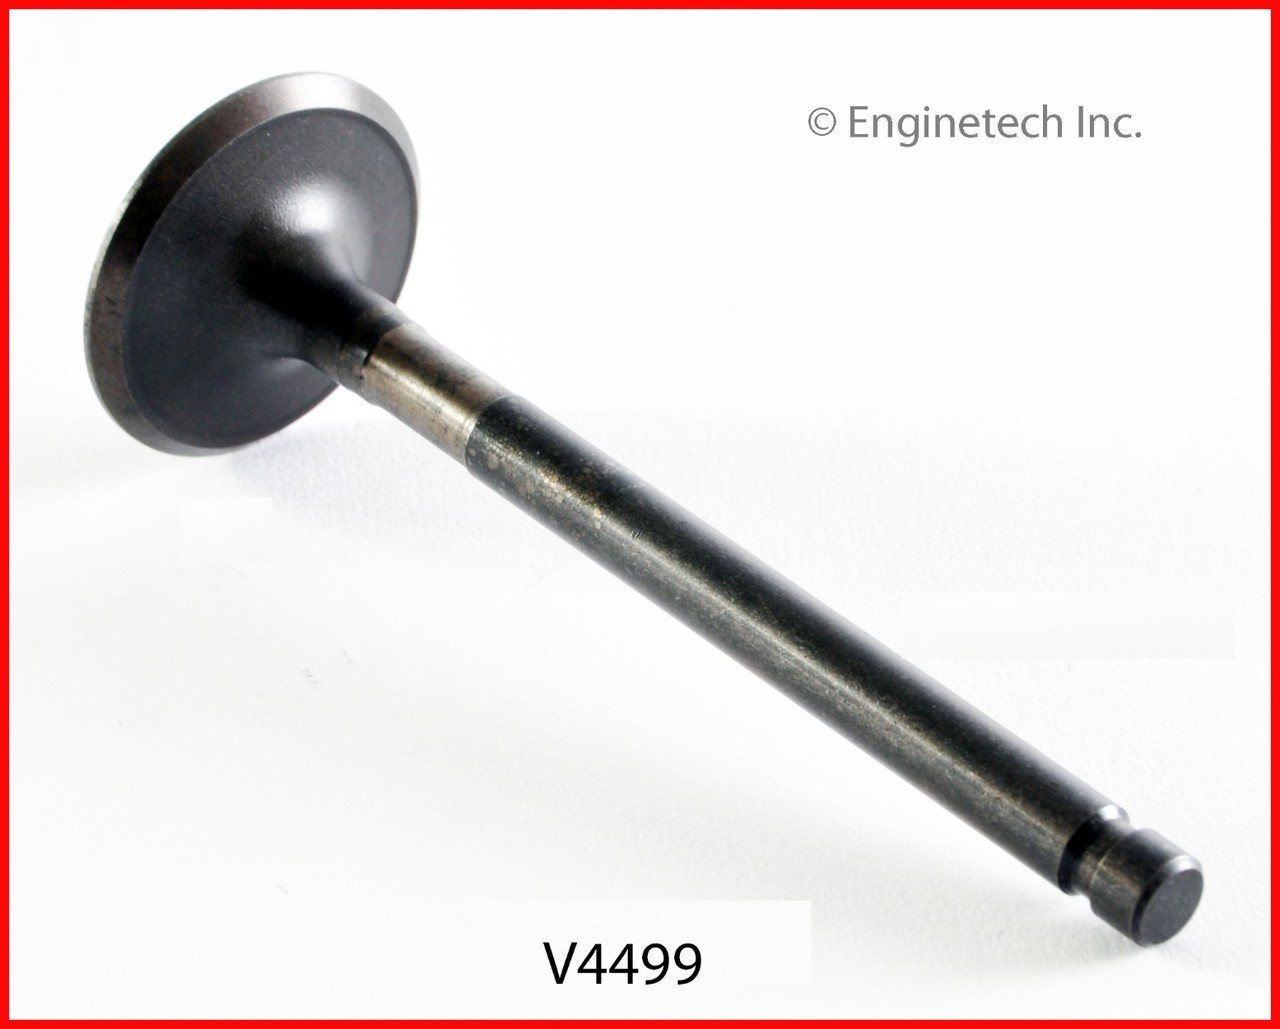 Exhaust Valve - 2014 Ford Mustang 3.7L (V4499.I82)